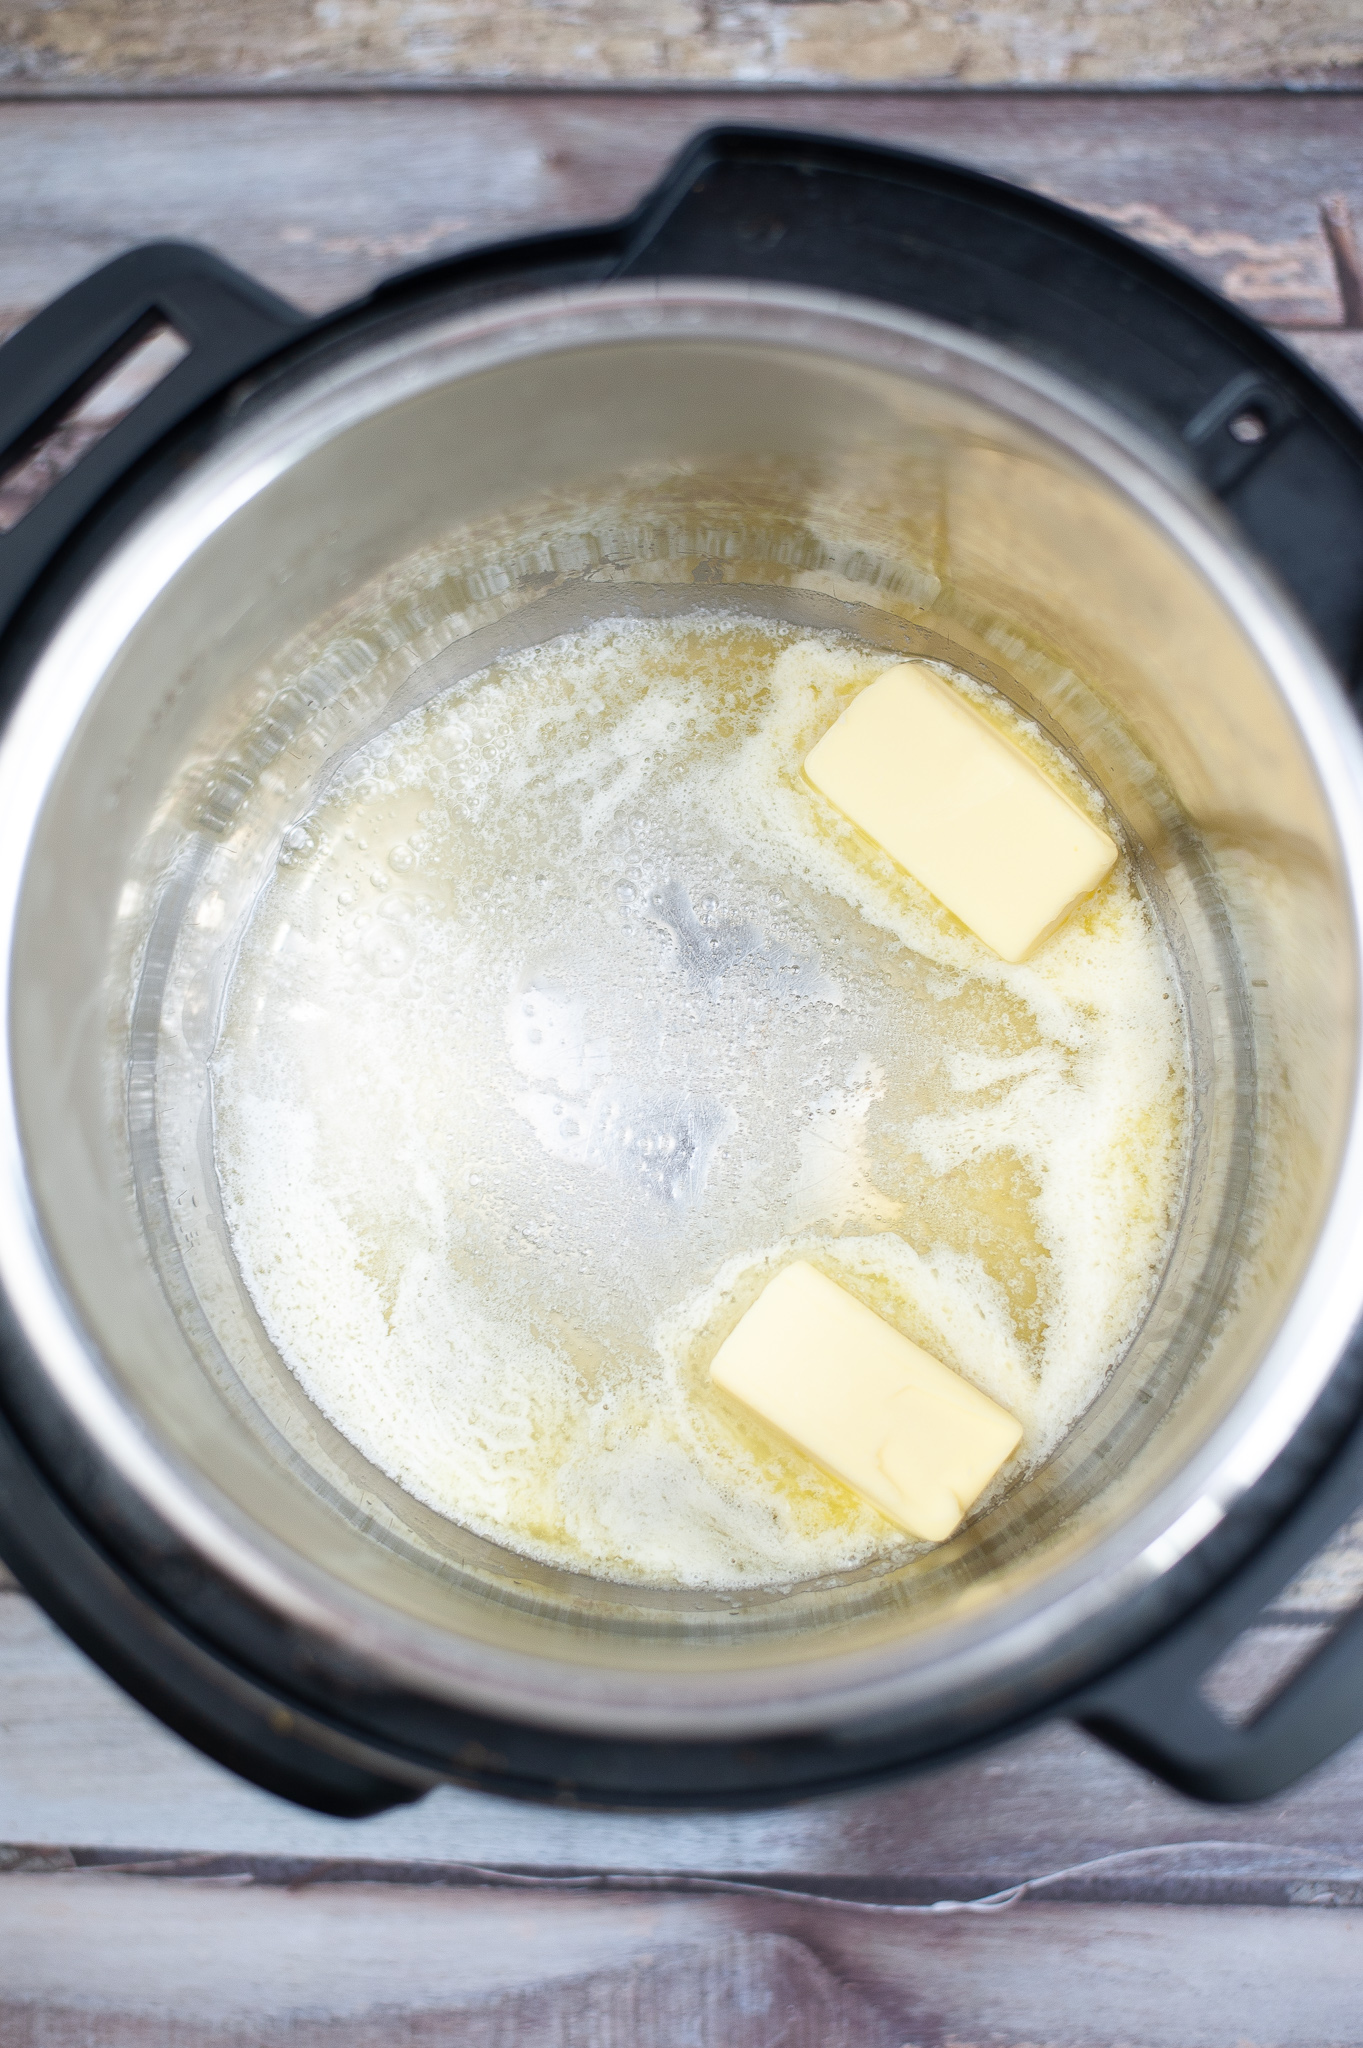 Instant pot with melted butter in the bottom.